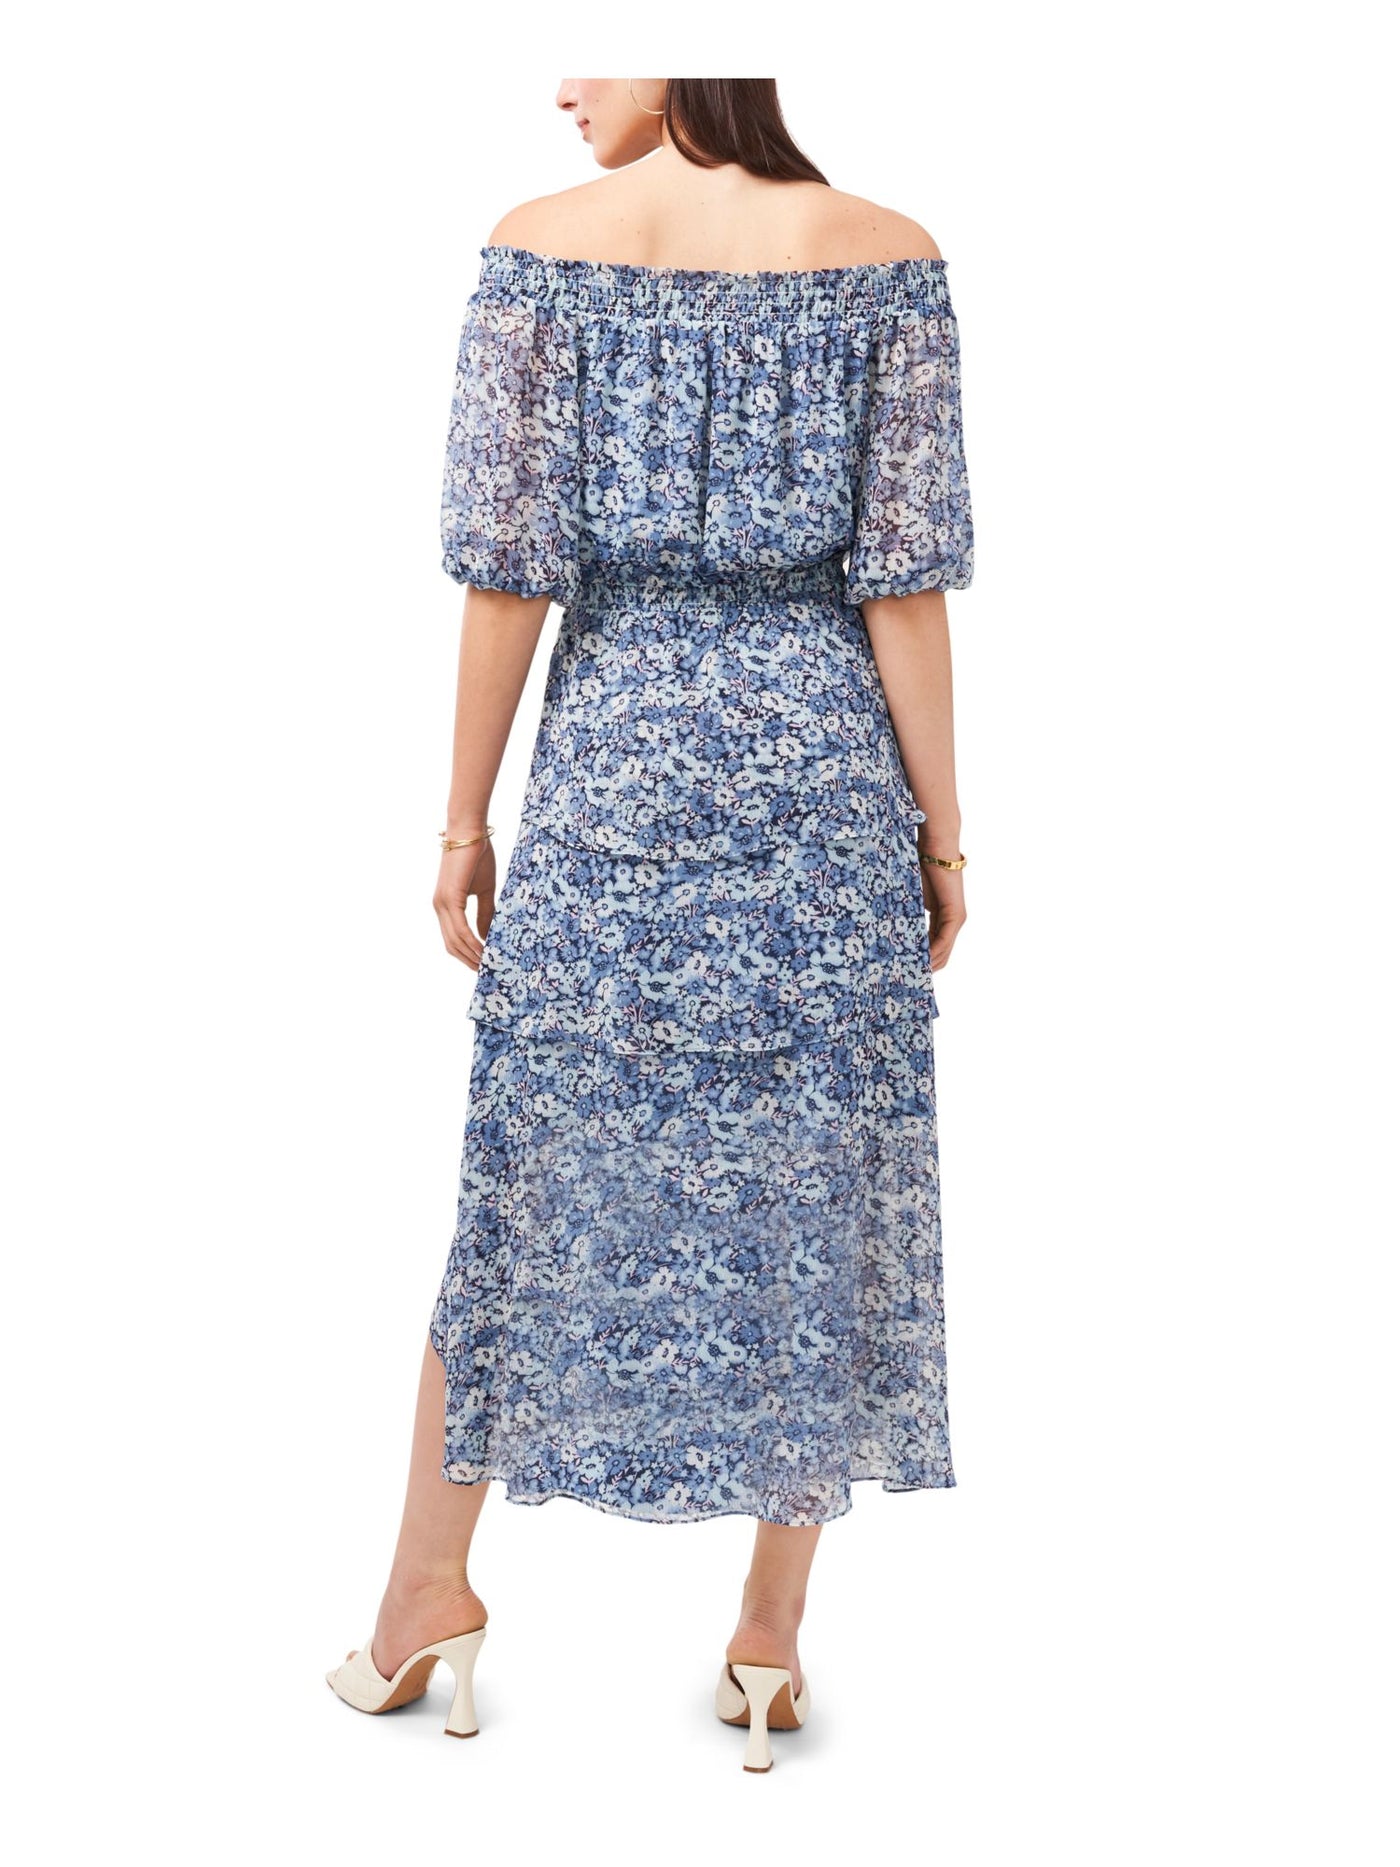 VINCE CAMUTO Womens Blue Ruffled Lined Floral Elbow Sleeve Off Shoulder Knee Length Wear To Work Hi-Lo Dress S